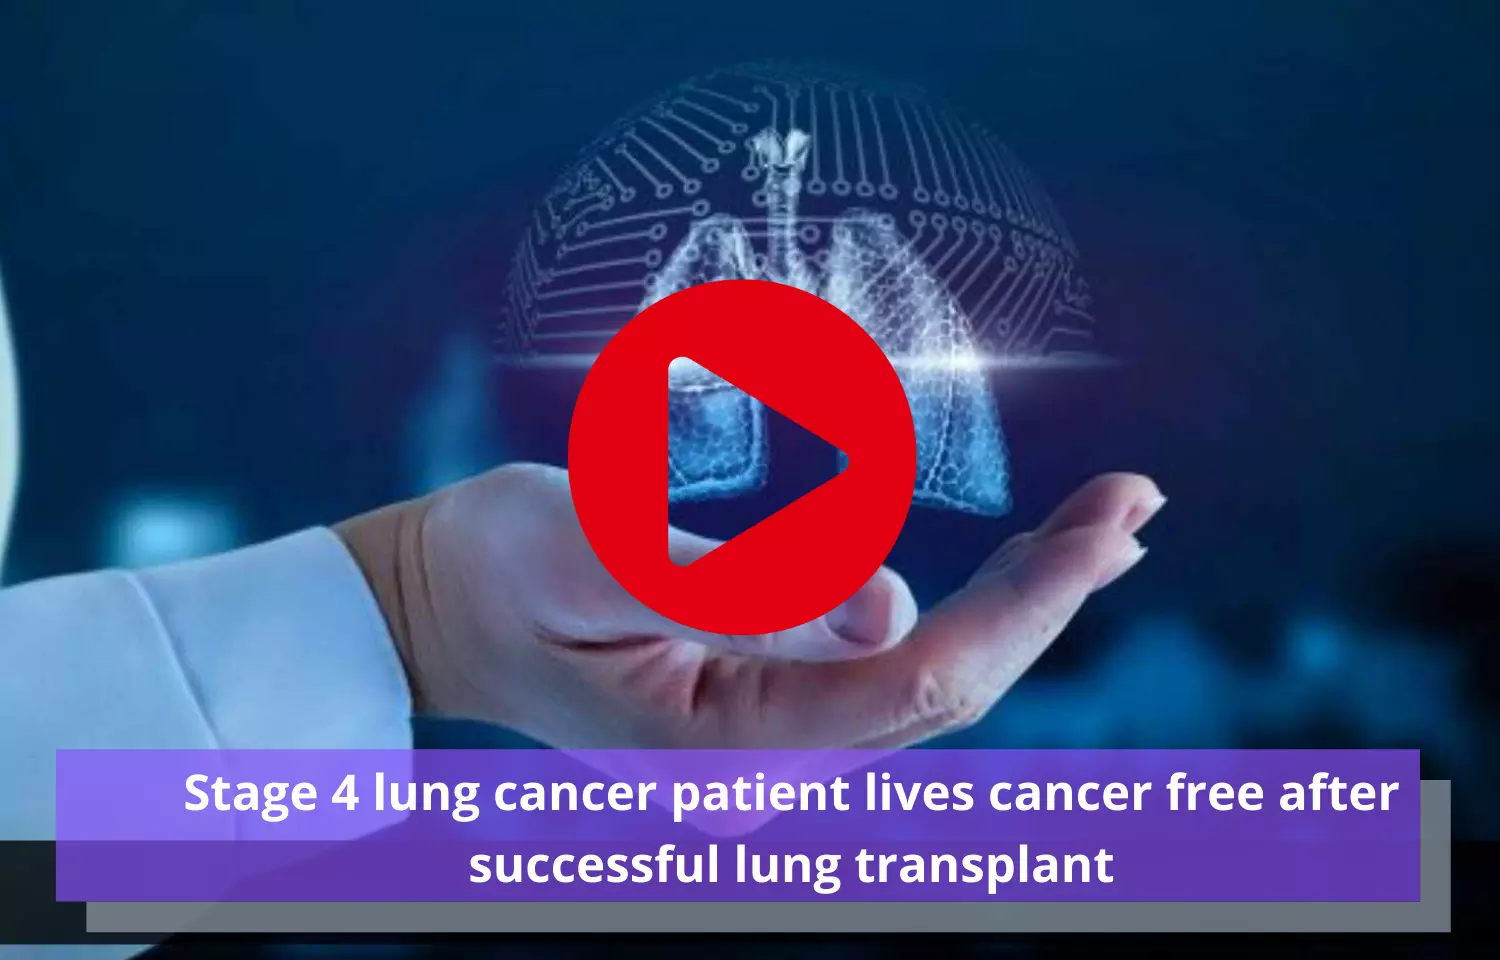 Successful lung transplant in stage 4 lung cancer patient makes him cancer-free